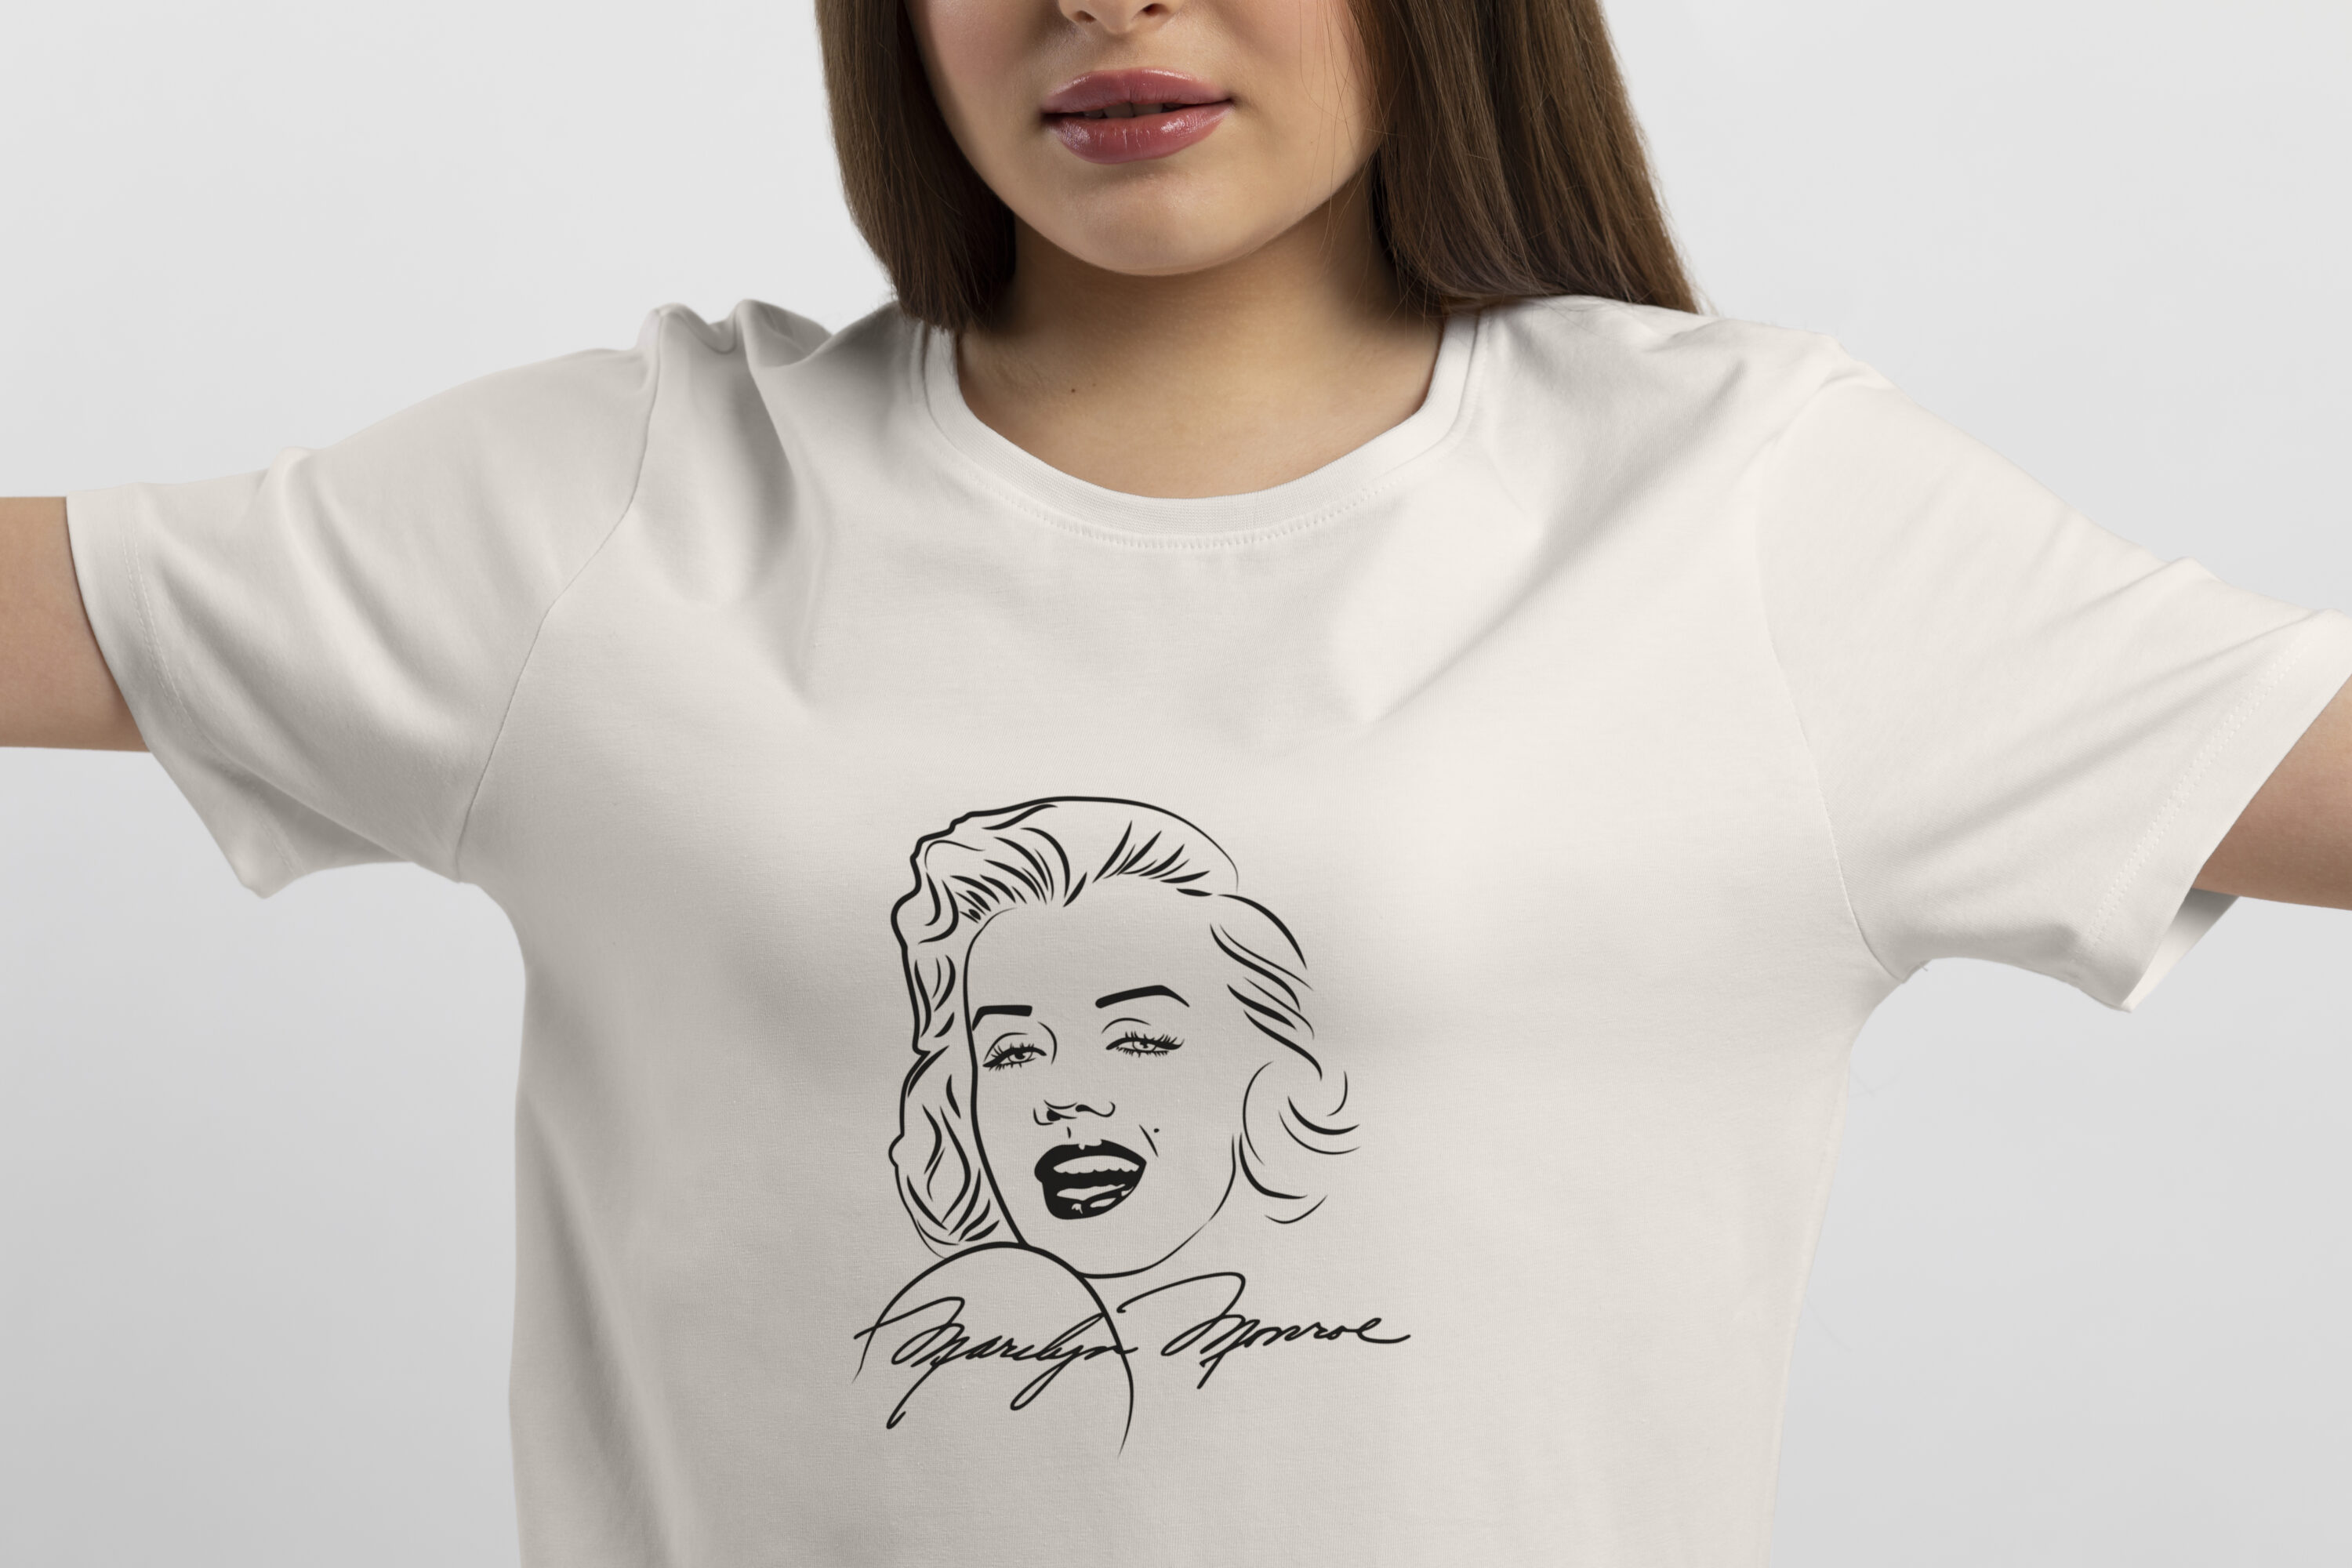 Image of a white t-shirt with a wonderful print of Marilyn Monroe and her signature.